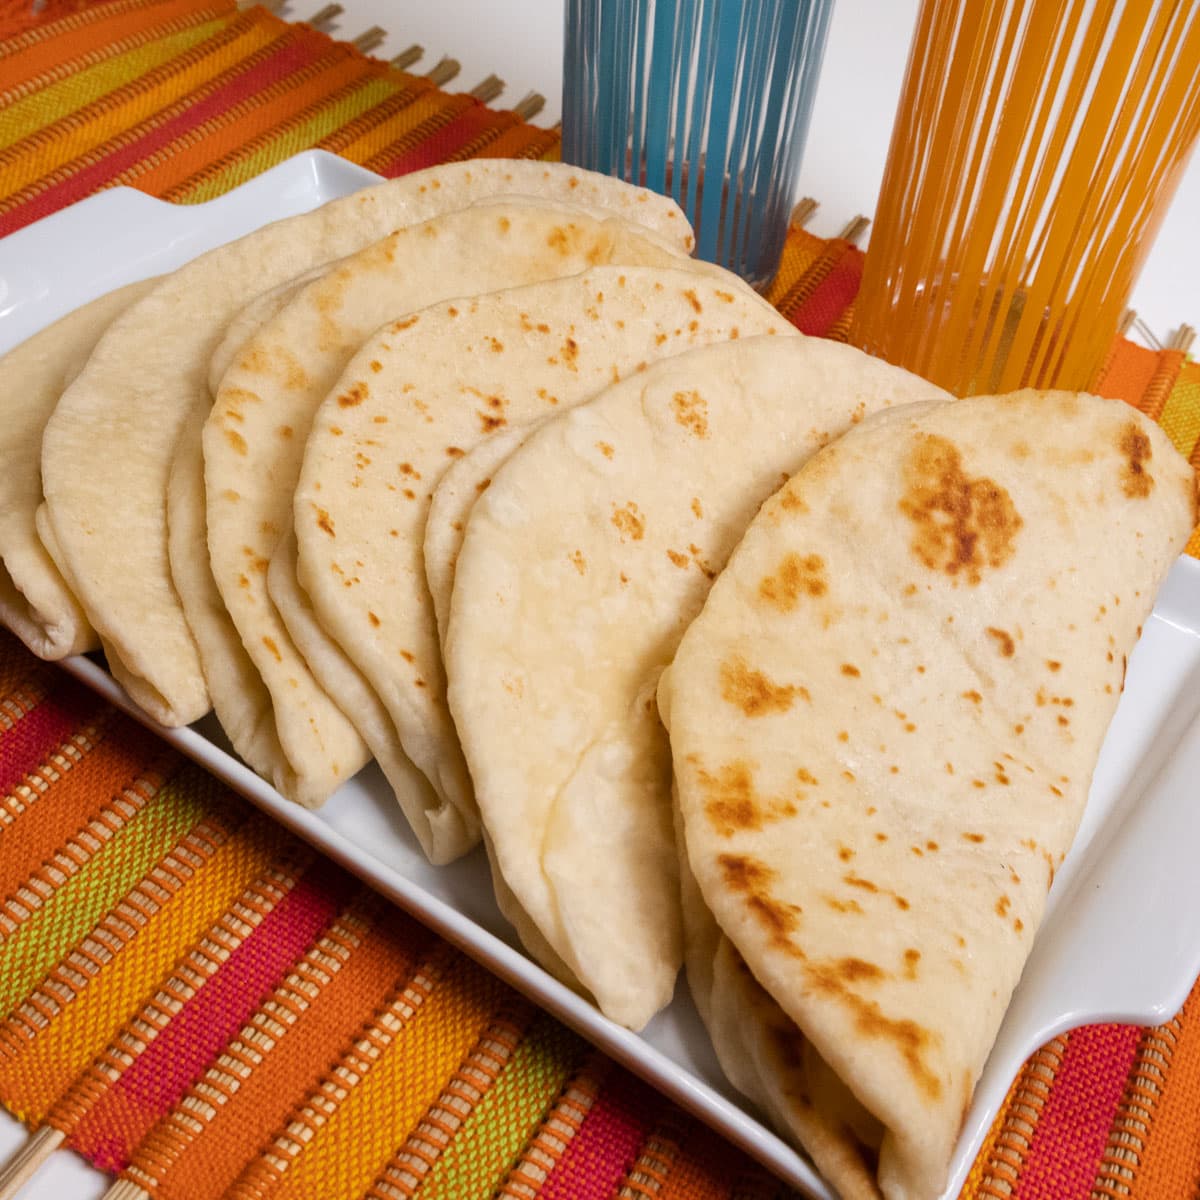 This final photo shows the flatbreads folded up on a white tray placed on a colorful runner with 2 glasses in the background.